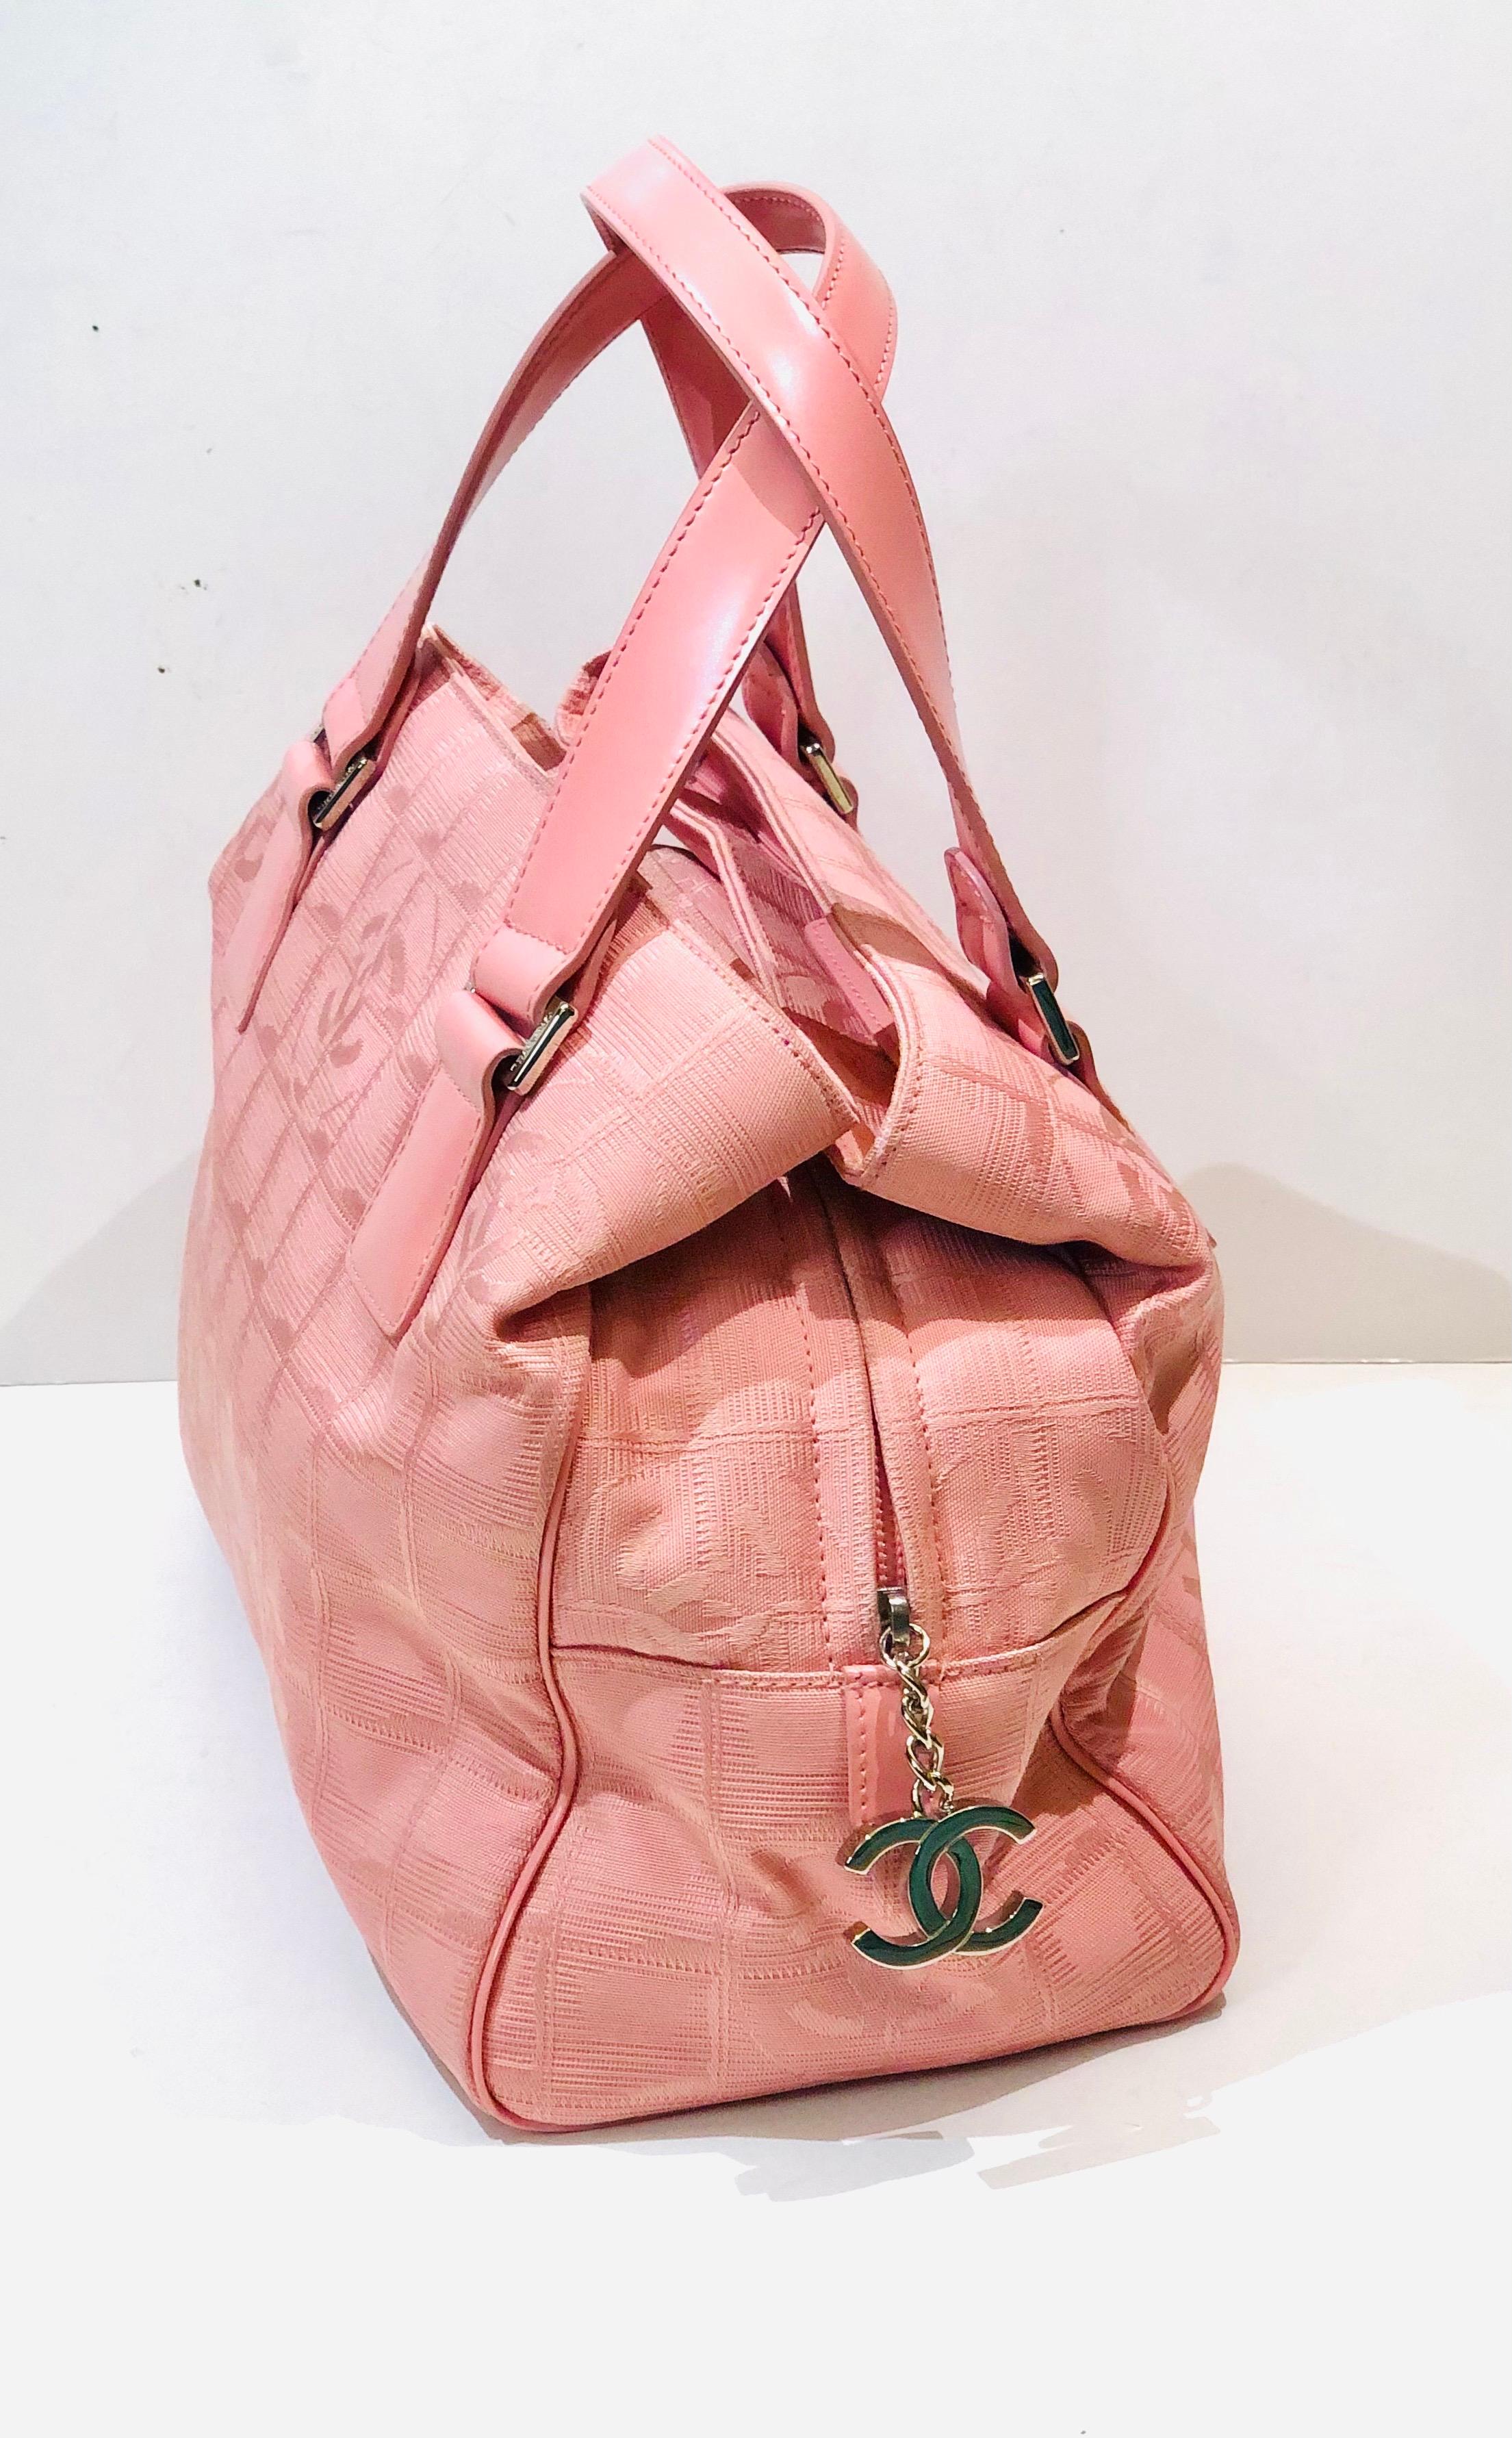 - Chanel pink boston style handbag from year 2004 to 2005.

- Leather handle.

- Two compartments zip closure.

- “CC” silver hardware. 

- Length: 30cm. Height: 22cm. Width: 12cm. Handle:36cm. Handle drop: 11cm

- Comes with authentic card and